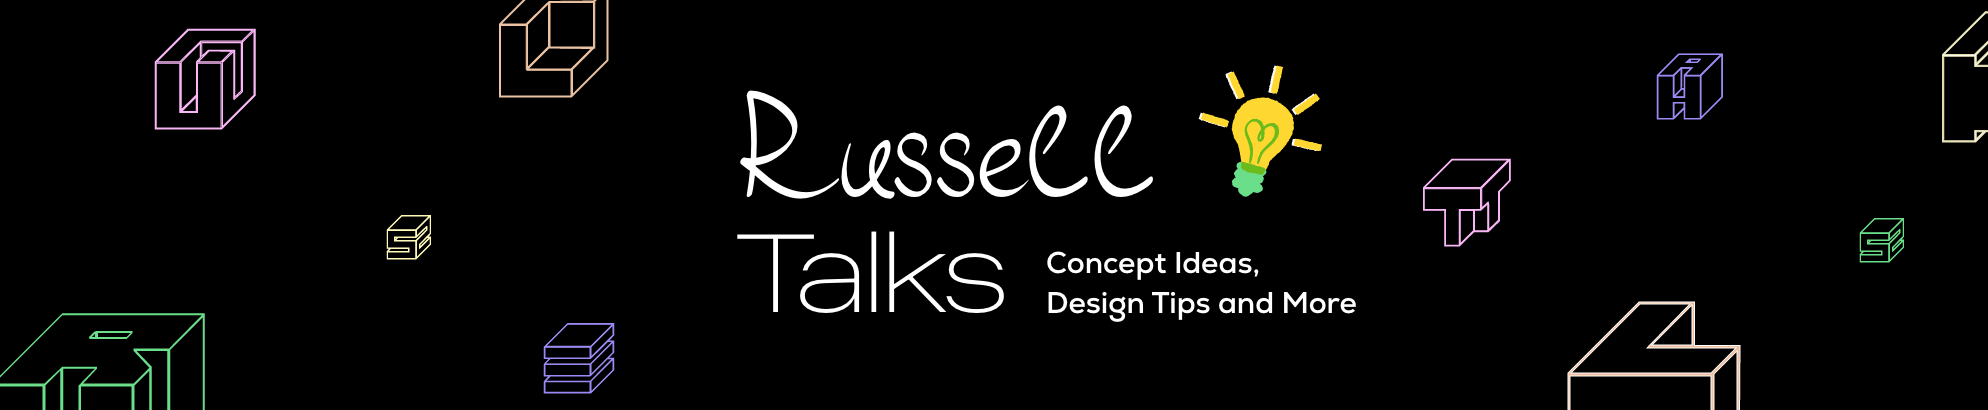 Concepts by Russells profilbanner